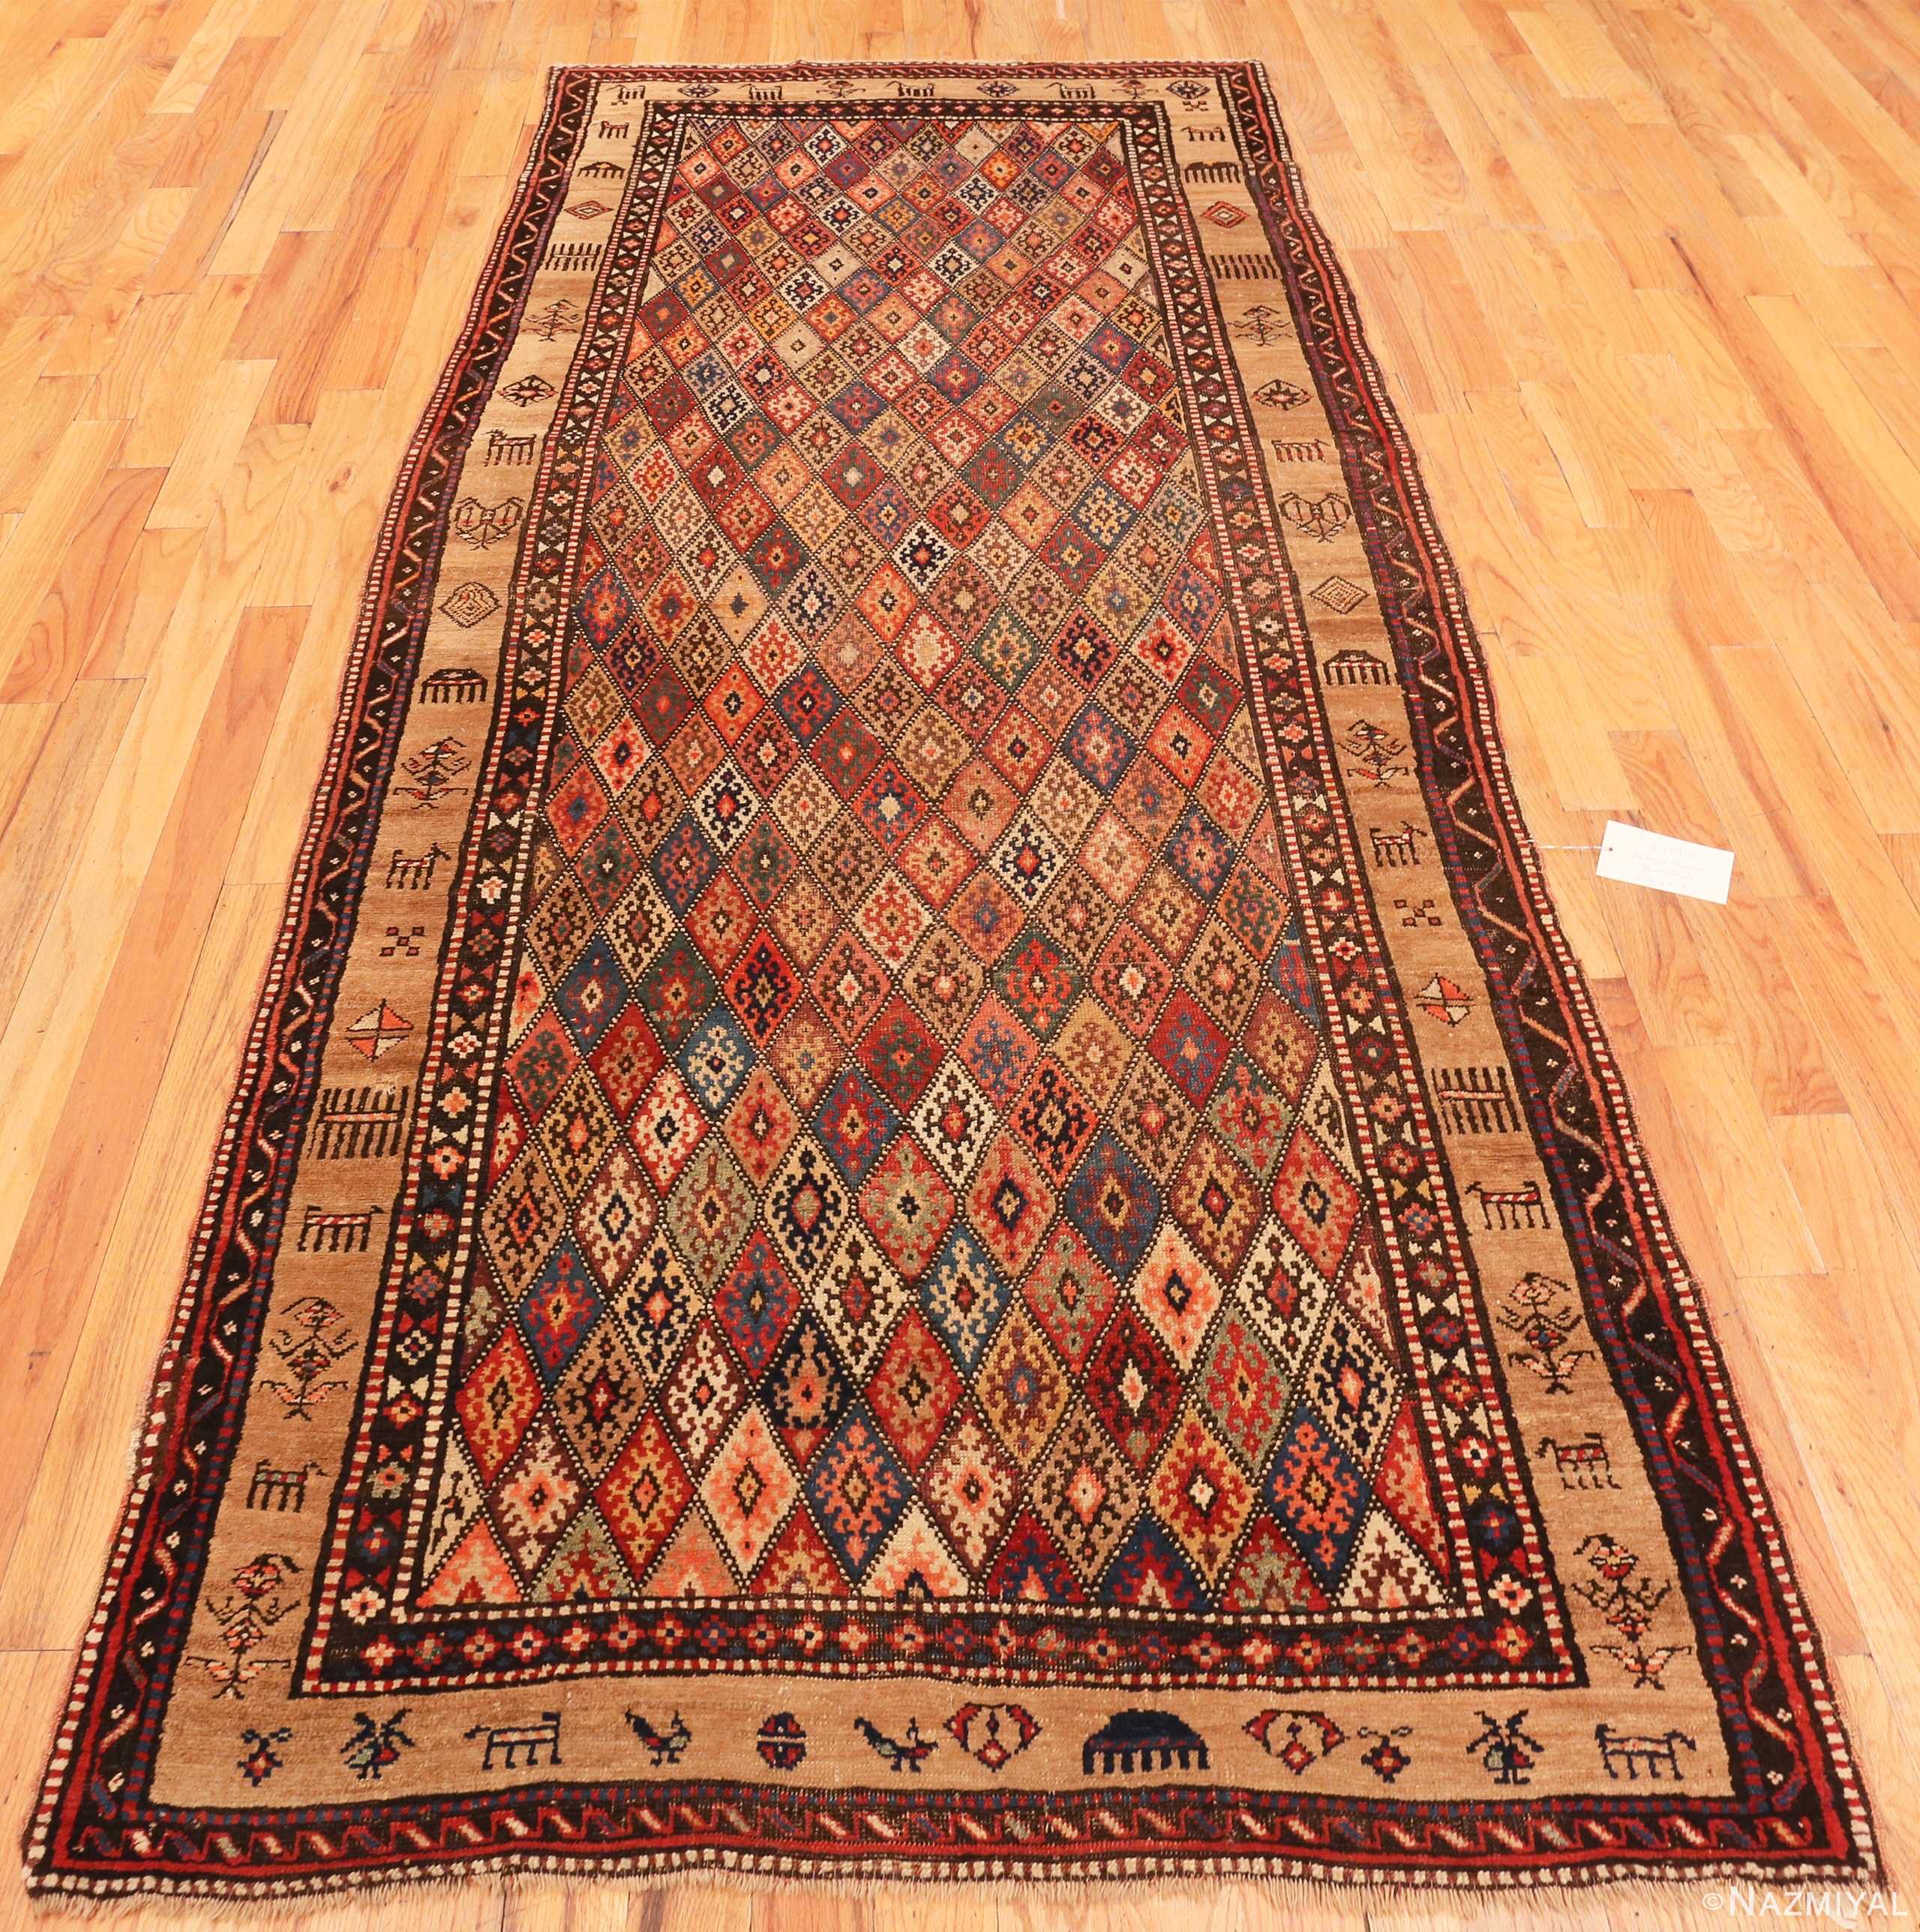 Whole View Of Antique Persian Bakshaish Area Rug 70953 by Nazmiyal Antique Rugs